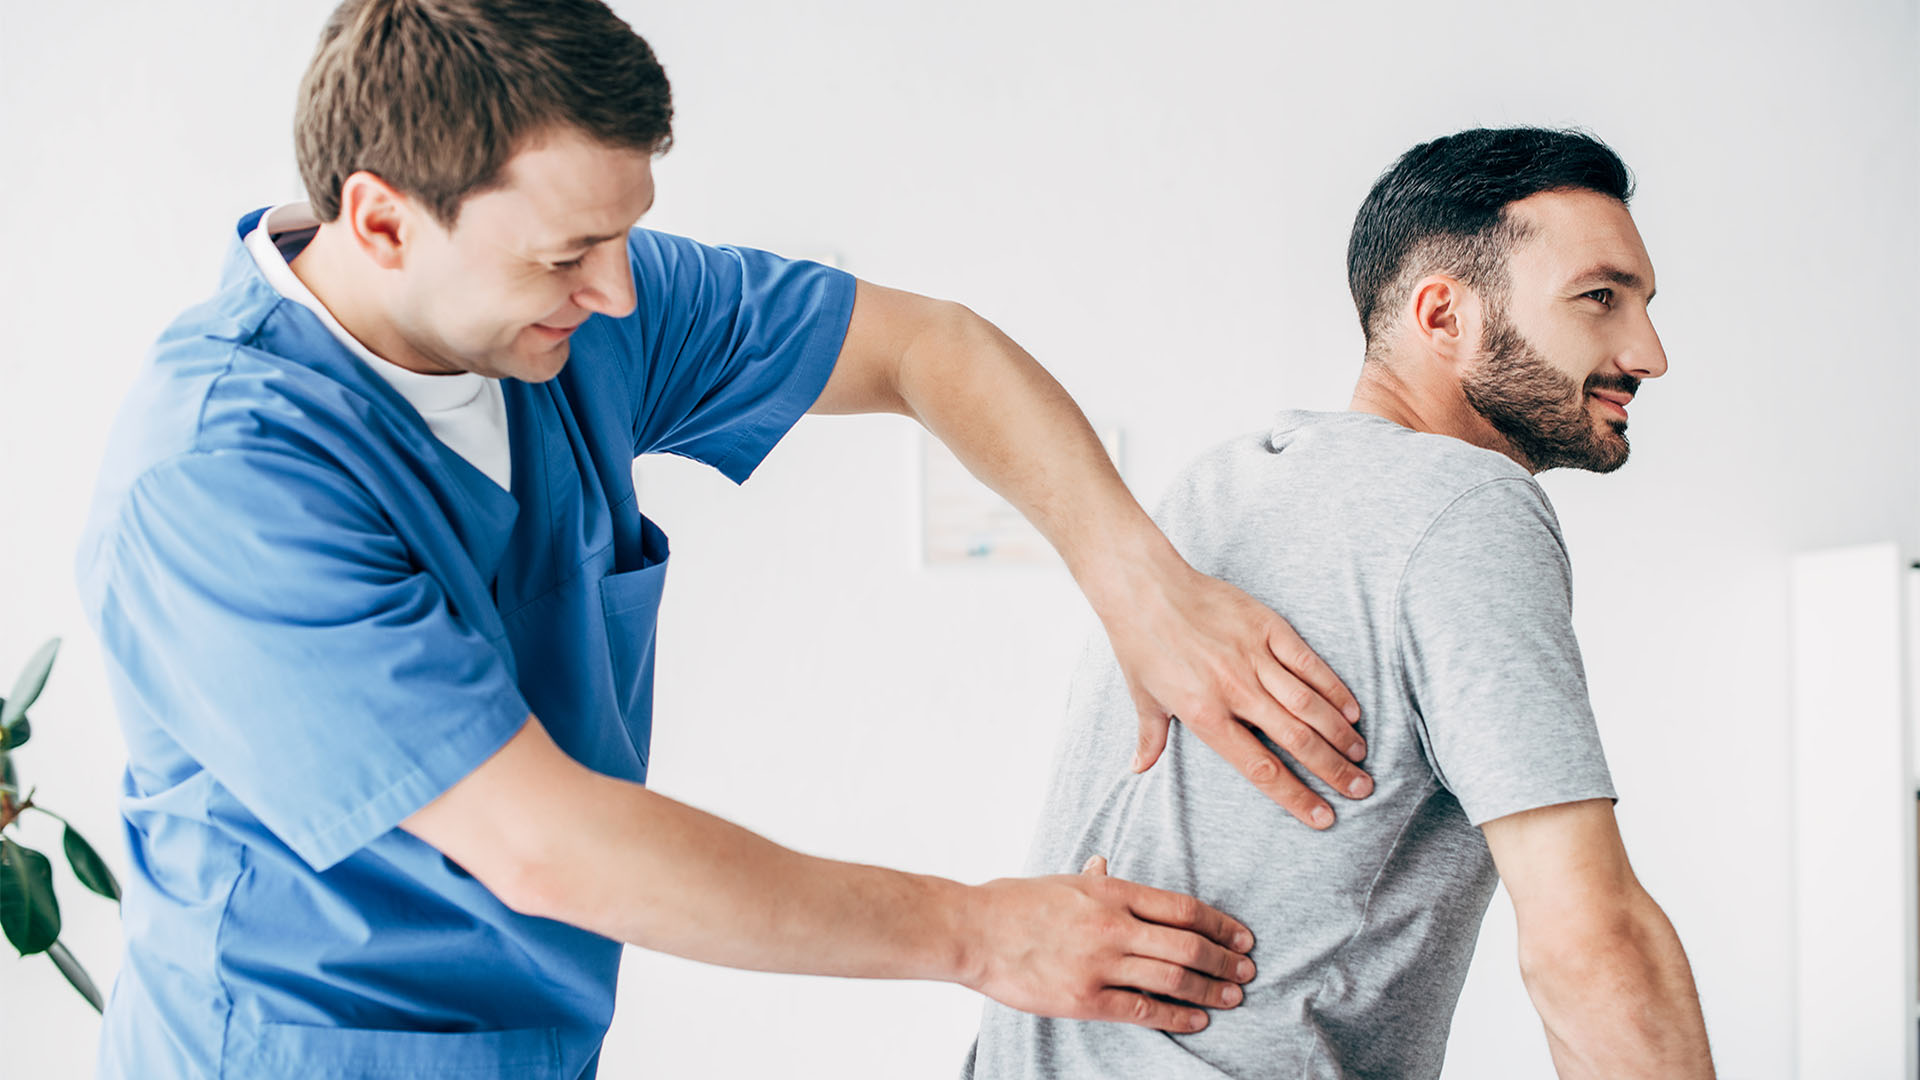 How Does Chiropractic Help? Benefits of Chiropractic Care